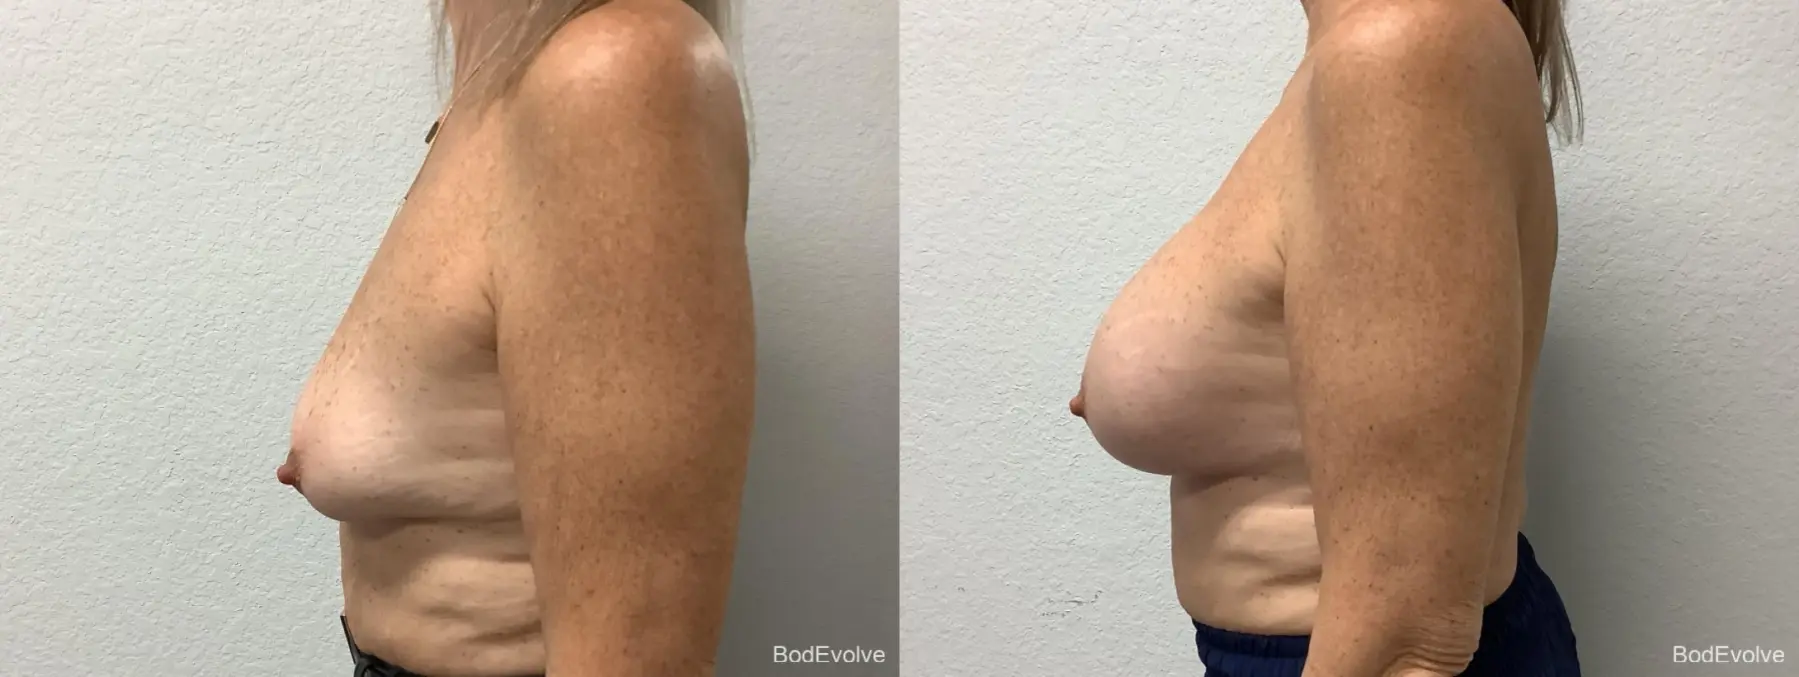 Breast Augmentation: Patient 9 - Before and After 3